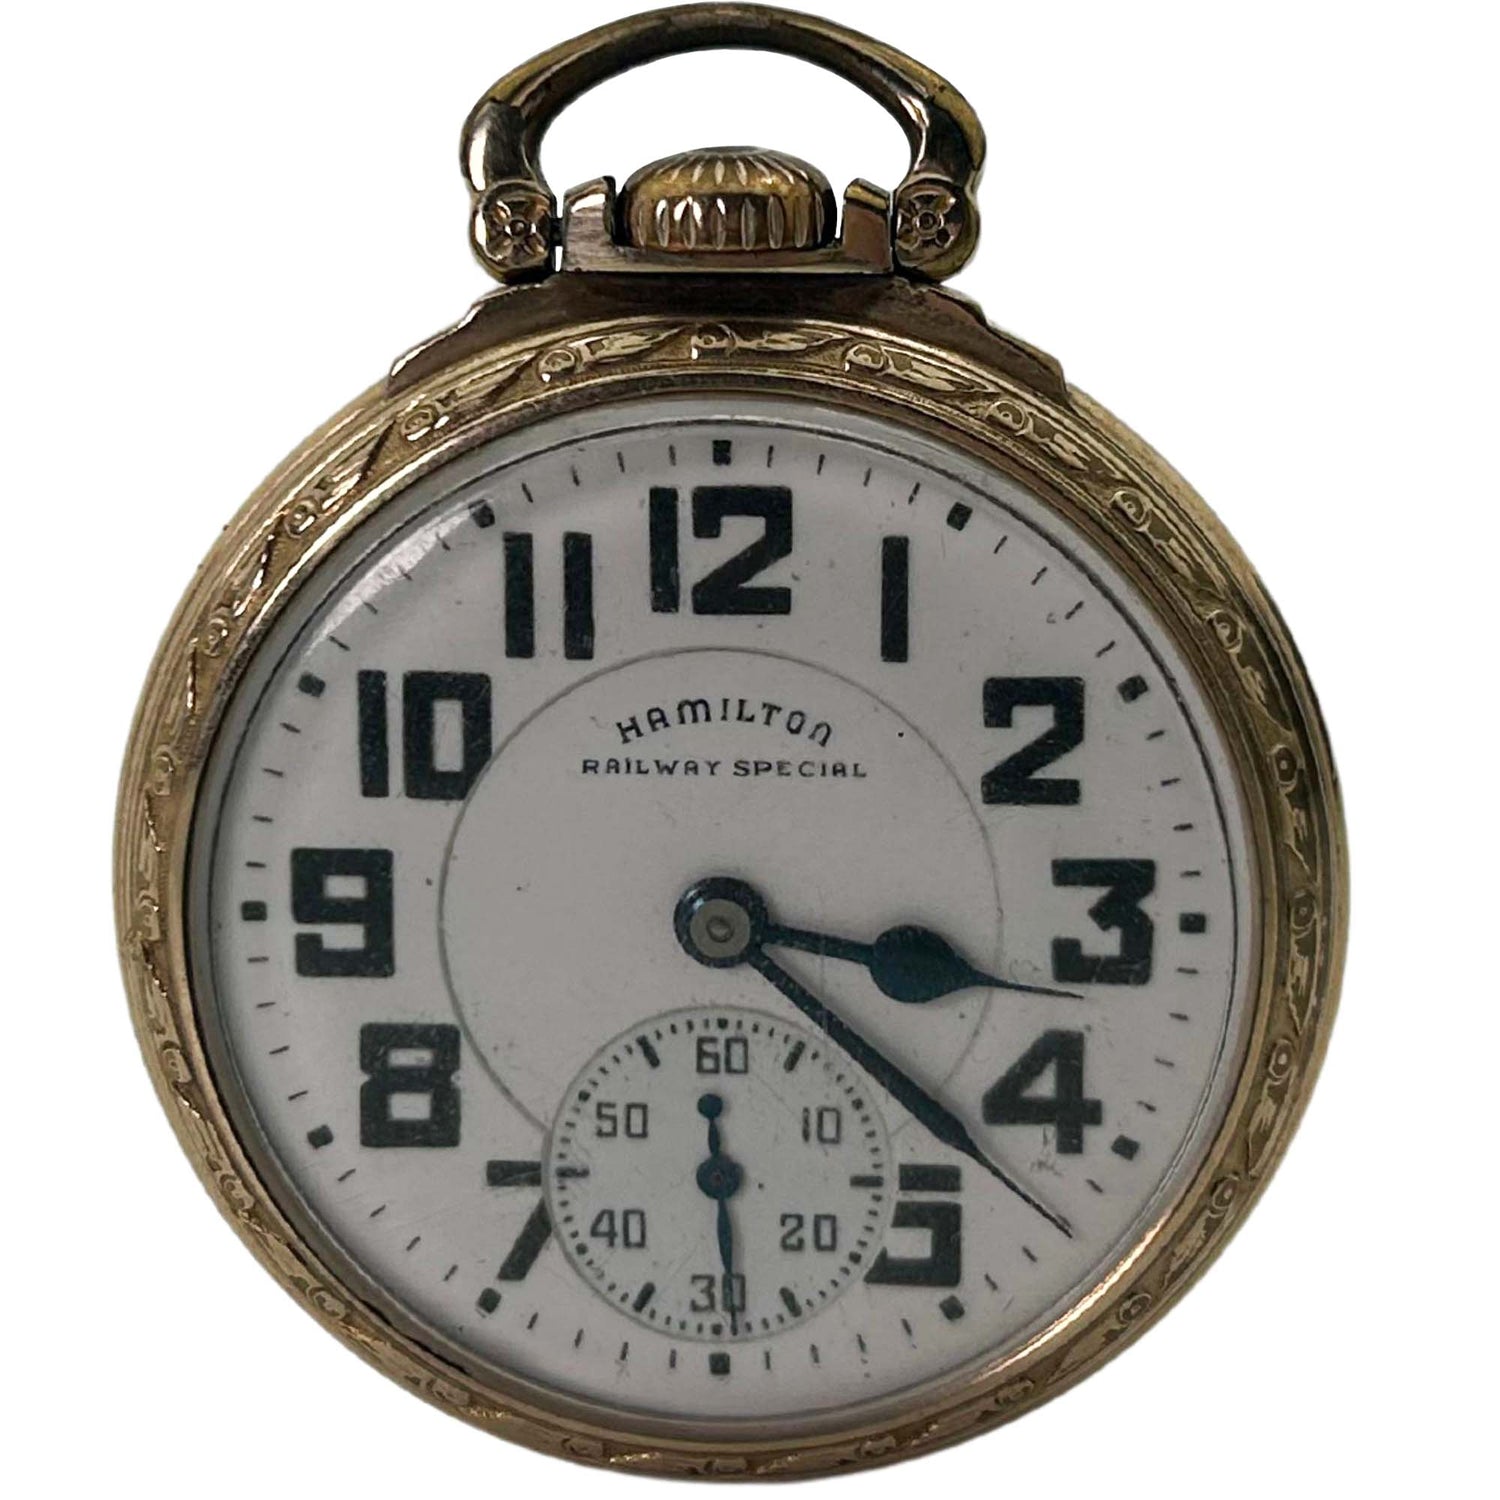 Hamilton Railway Special Gold Filled Pocket Watch Zoomed View